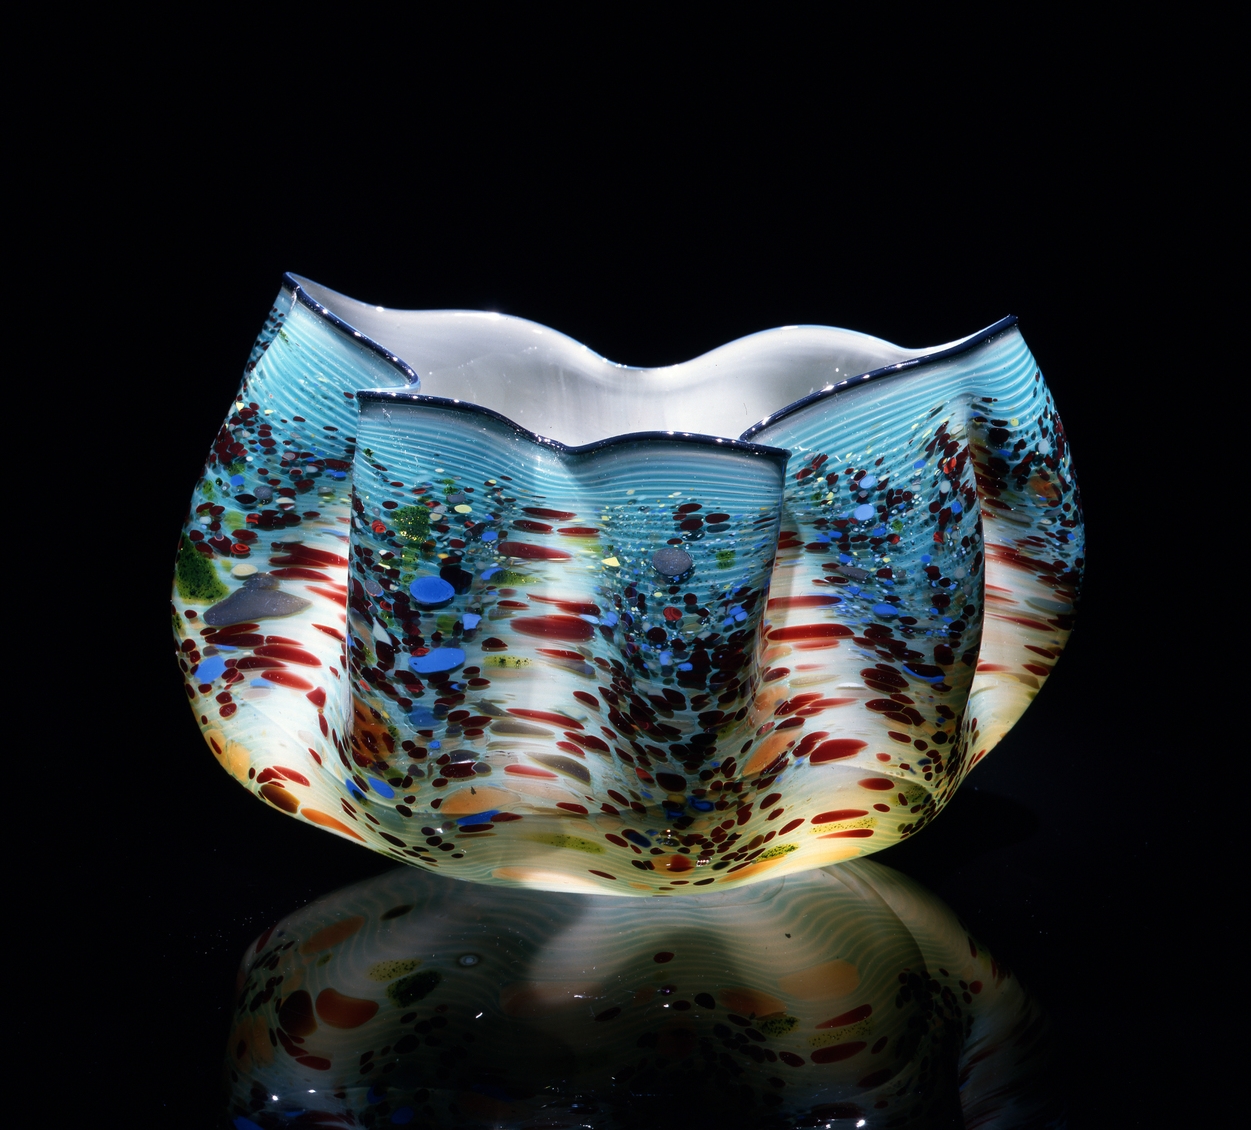  Dale Chihuly,&nbsp; Thames Gray Macchia with Kingfisher Blue Lip Wrap &nbsp;(1982, glass, 6 x 9 x 7&nbsp;inches), DC.67 